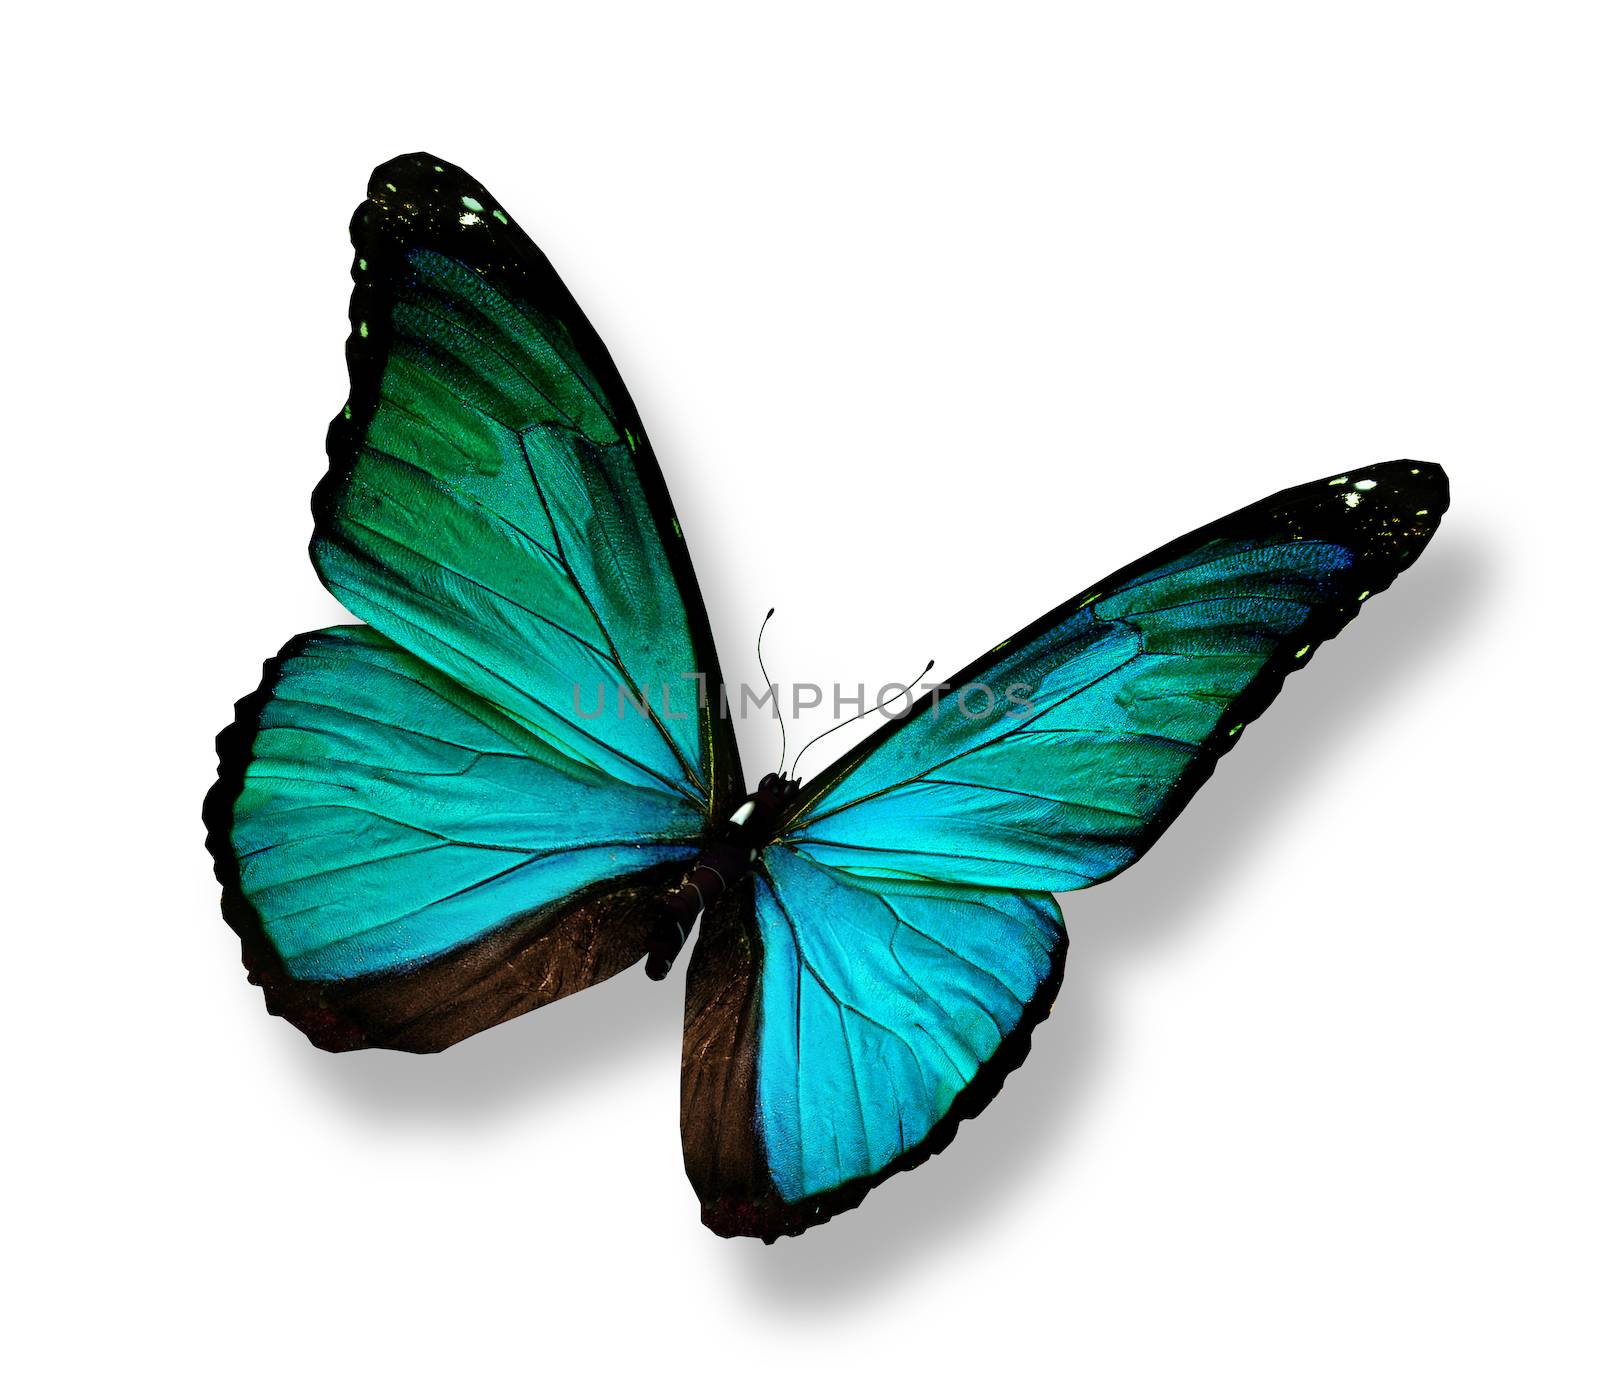 Turquoise butterfly, isolated on white by suns_28